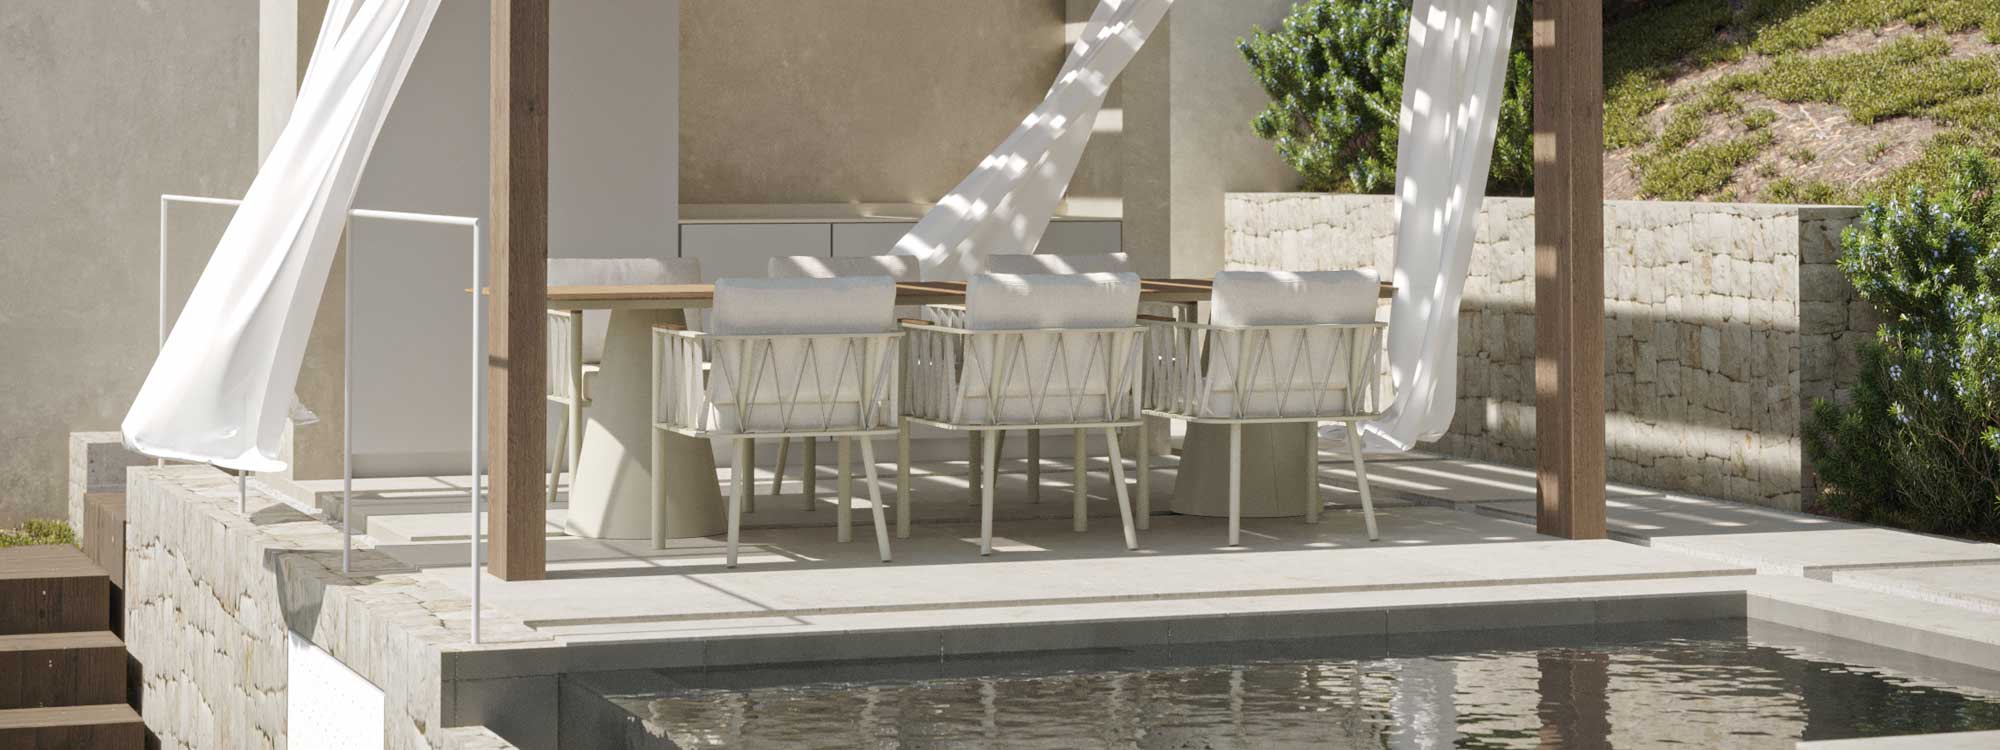 Image of Ava geometric garden dining furniture by Oiside, shown beneath shady pergola with curtains blowing in the breeze